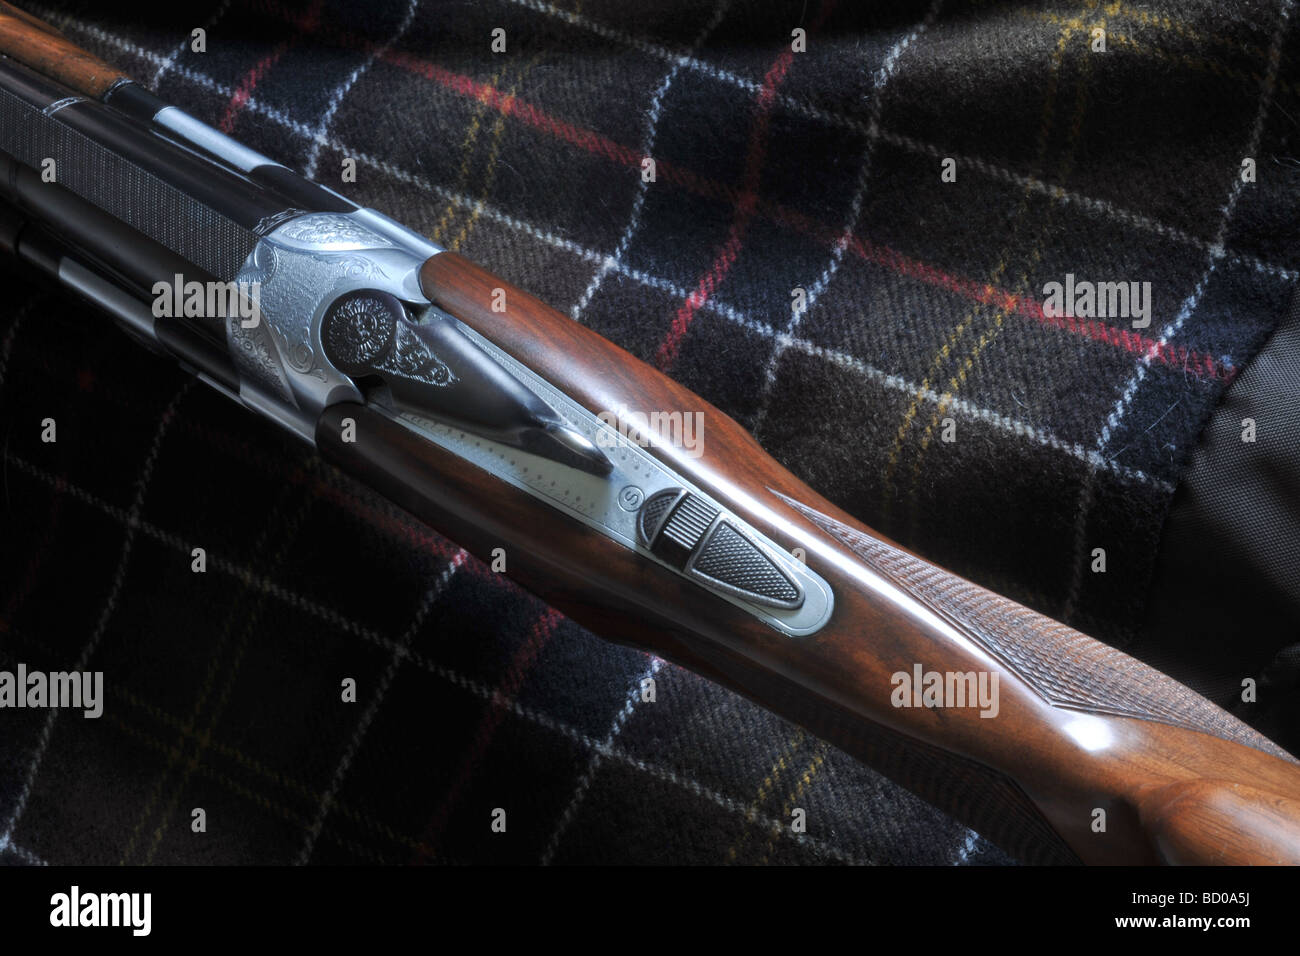 Beretta 682 Special 12 gauge over under shotgun, with engraved breach and diamond pattern wood Stock Photo